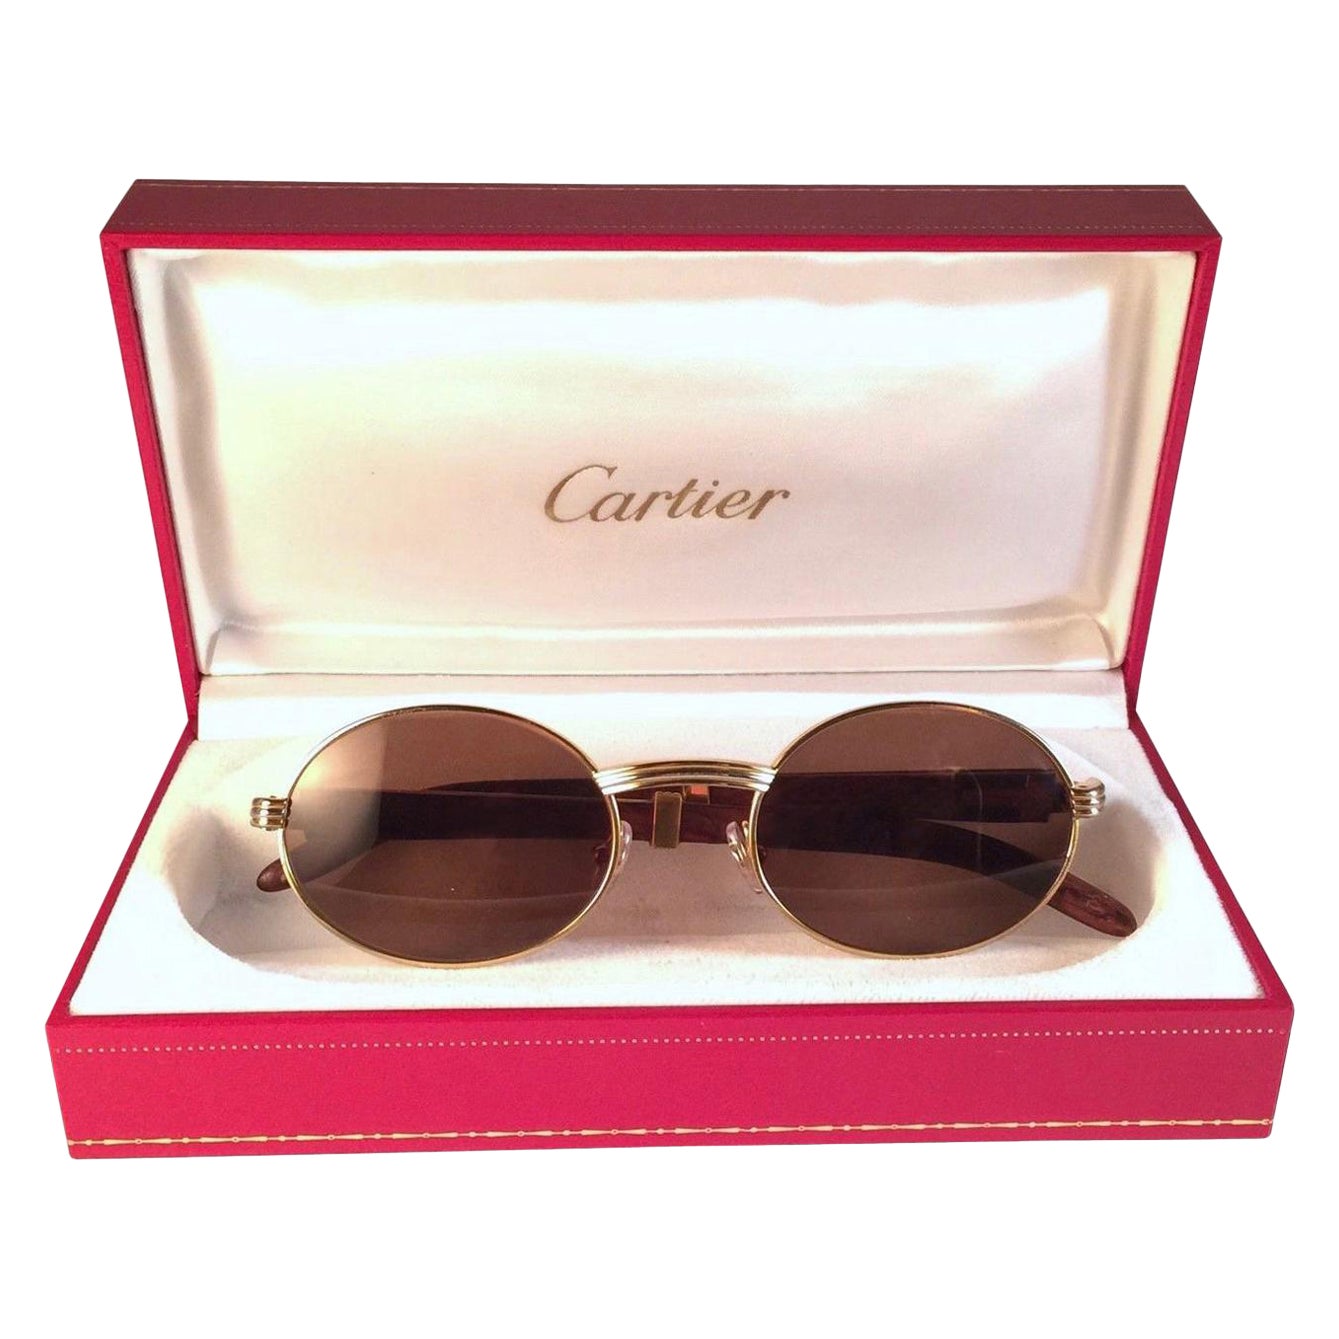 shuffle manager birth Cartier Giverny - 4 For Sale on 1stDibs | cartier giverny glasses, cartier  giverny palisander, cartier giverny sunglasses